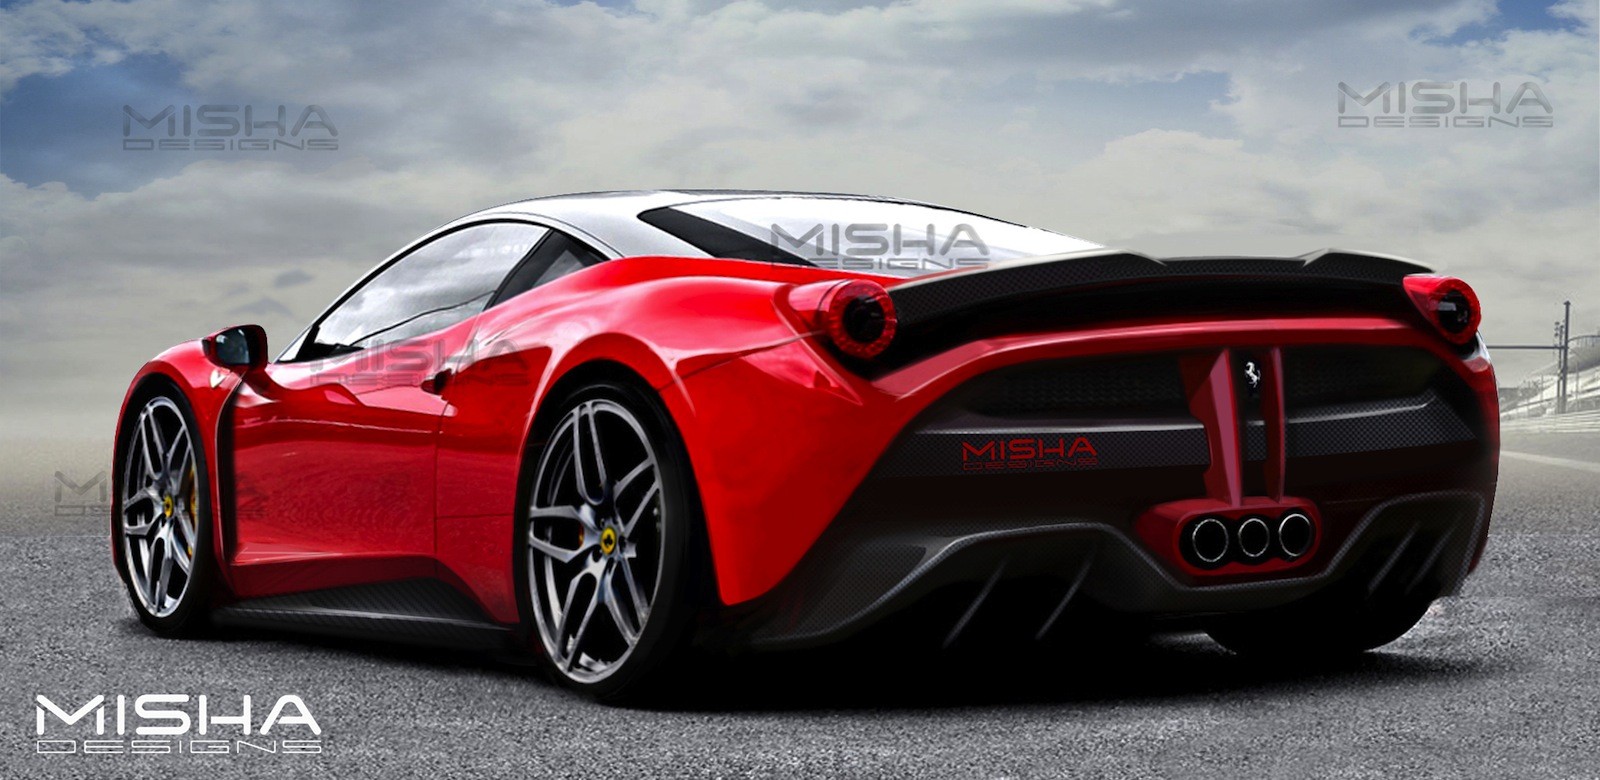 misha-designs-ferrari-458-body-kit-is-pure-candy-for-the-eye_2